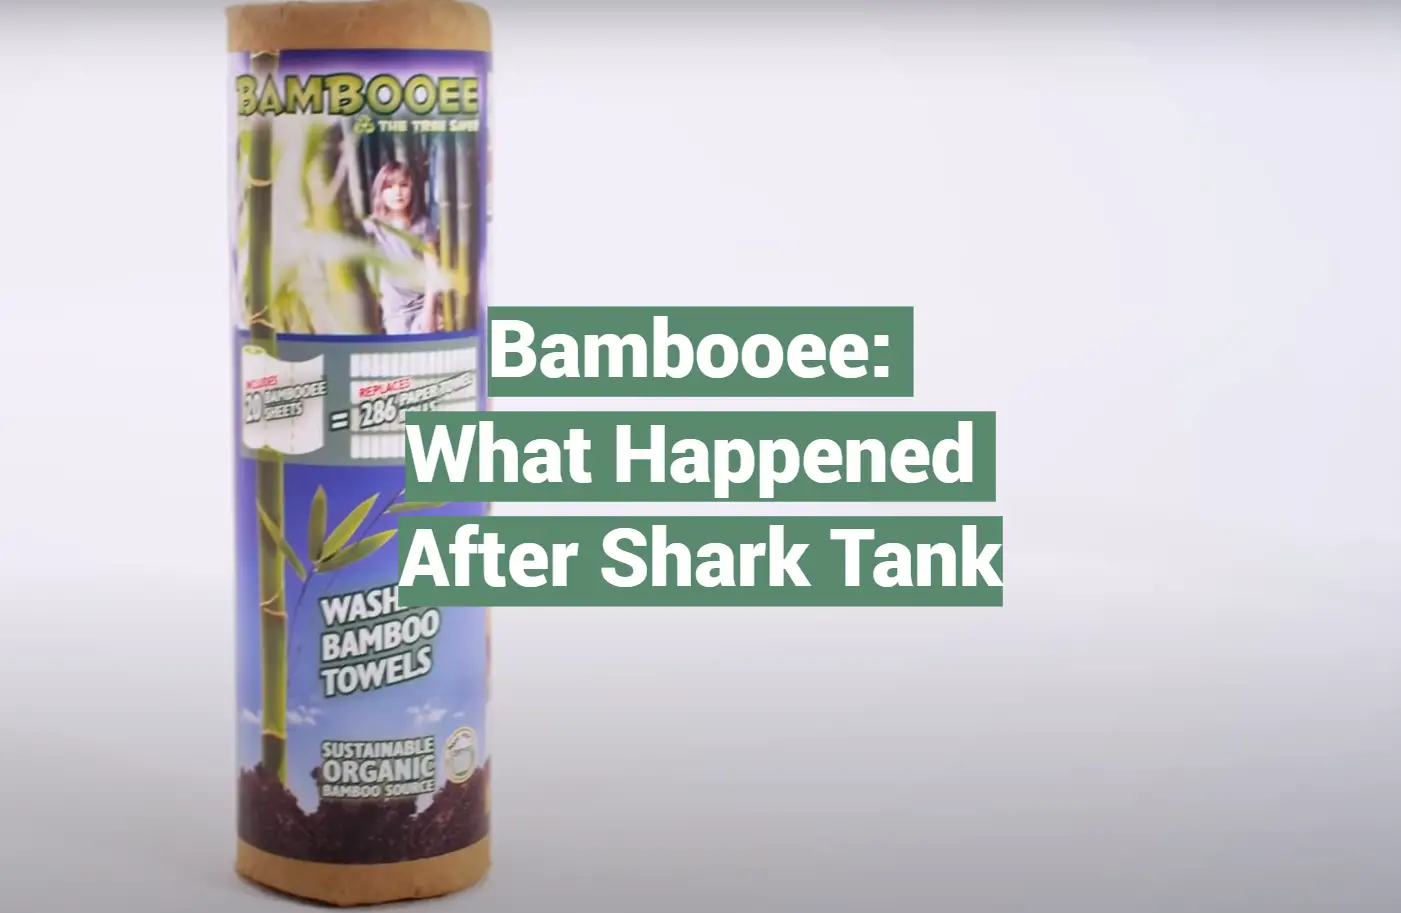 Bambooee: What Happened After Shark Tank